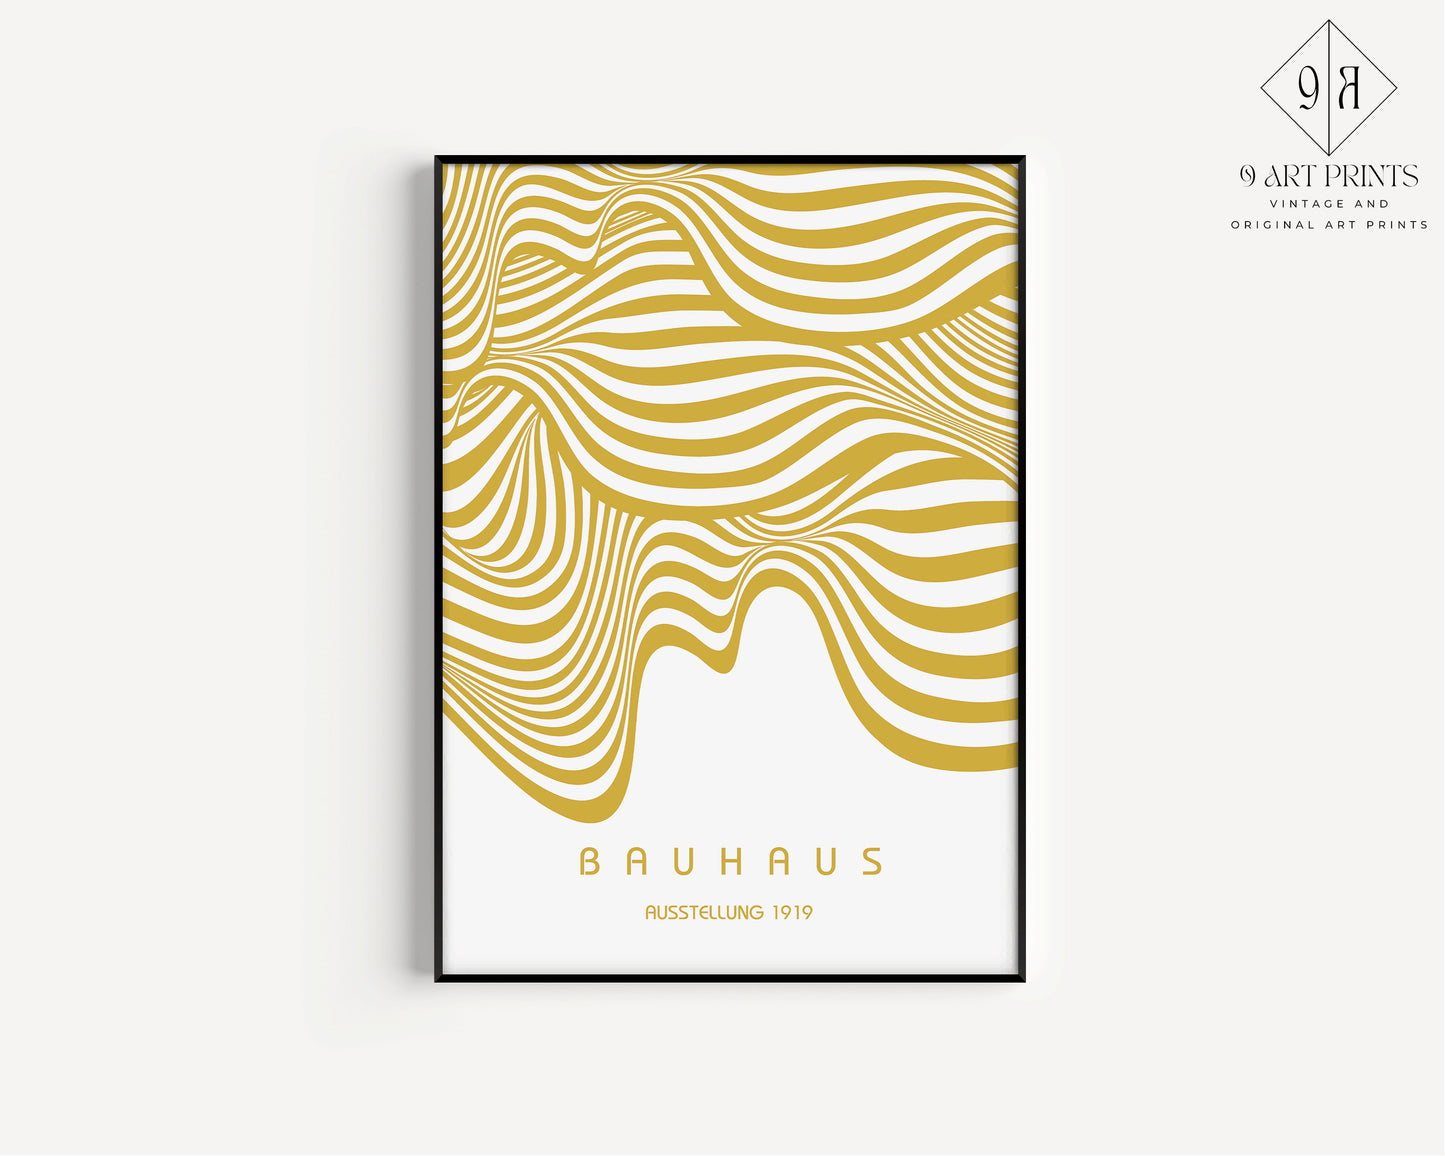 Framed White Gold Bauhaus Poster Wavy Lines Mid-Century Modern Art Print Vintage Minimalist Abstract Wall Art Abstract Gift Idea